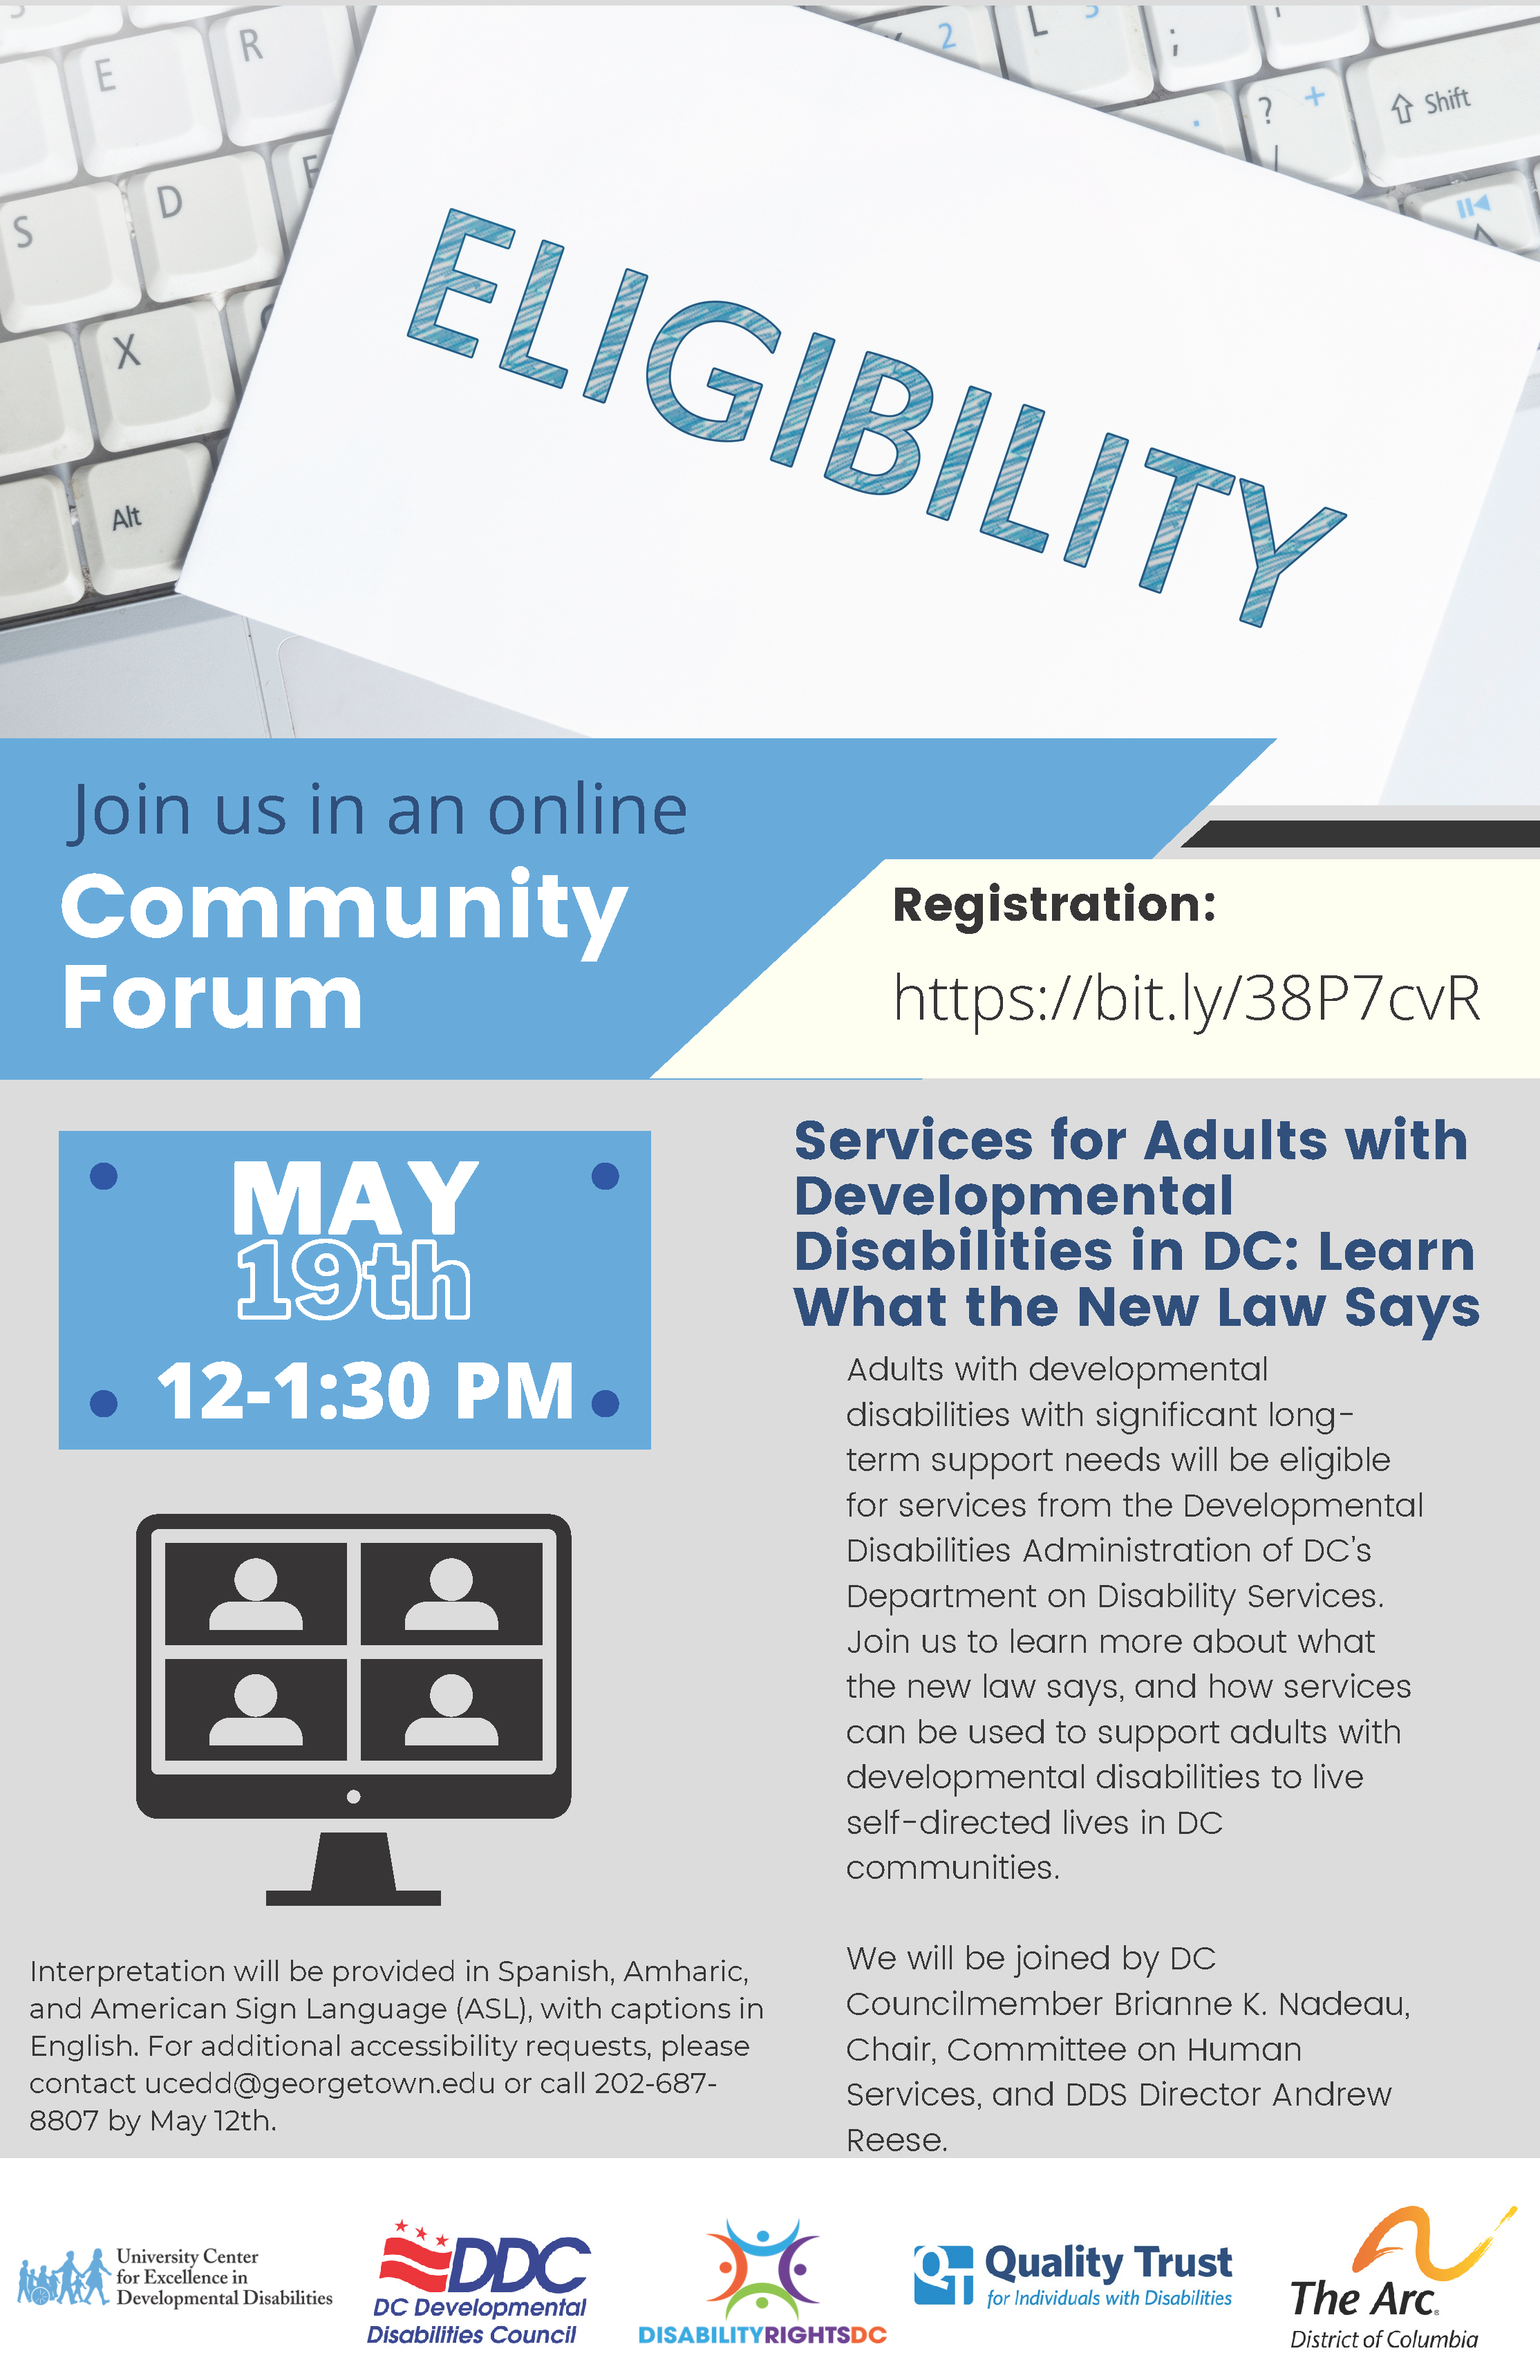 Community Forum: Services for Adults with Developmental Disabilities in DC: Learn What the New Law Says